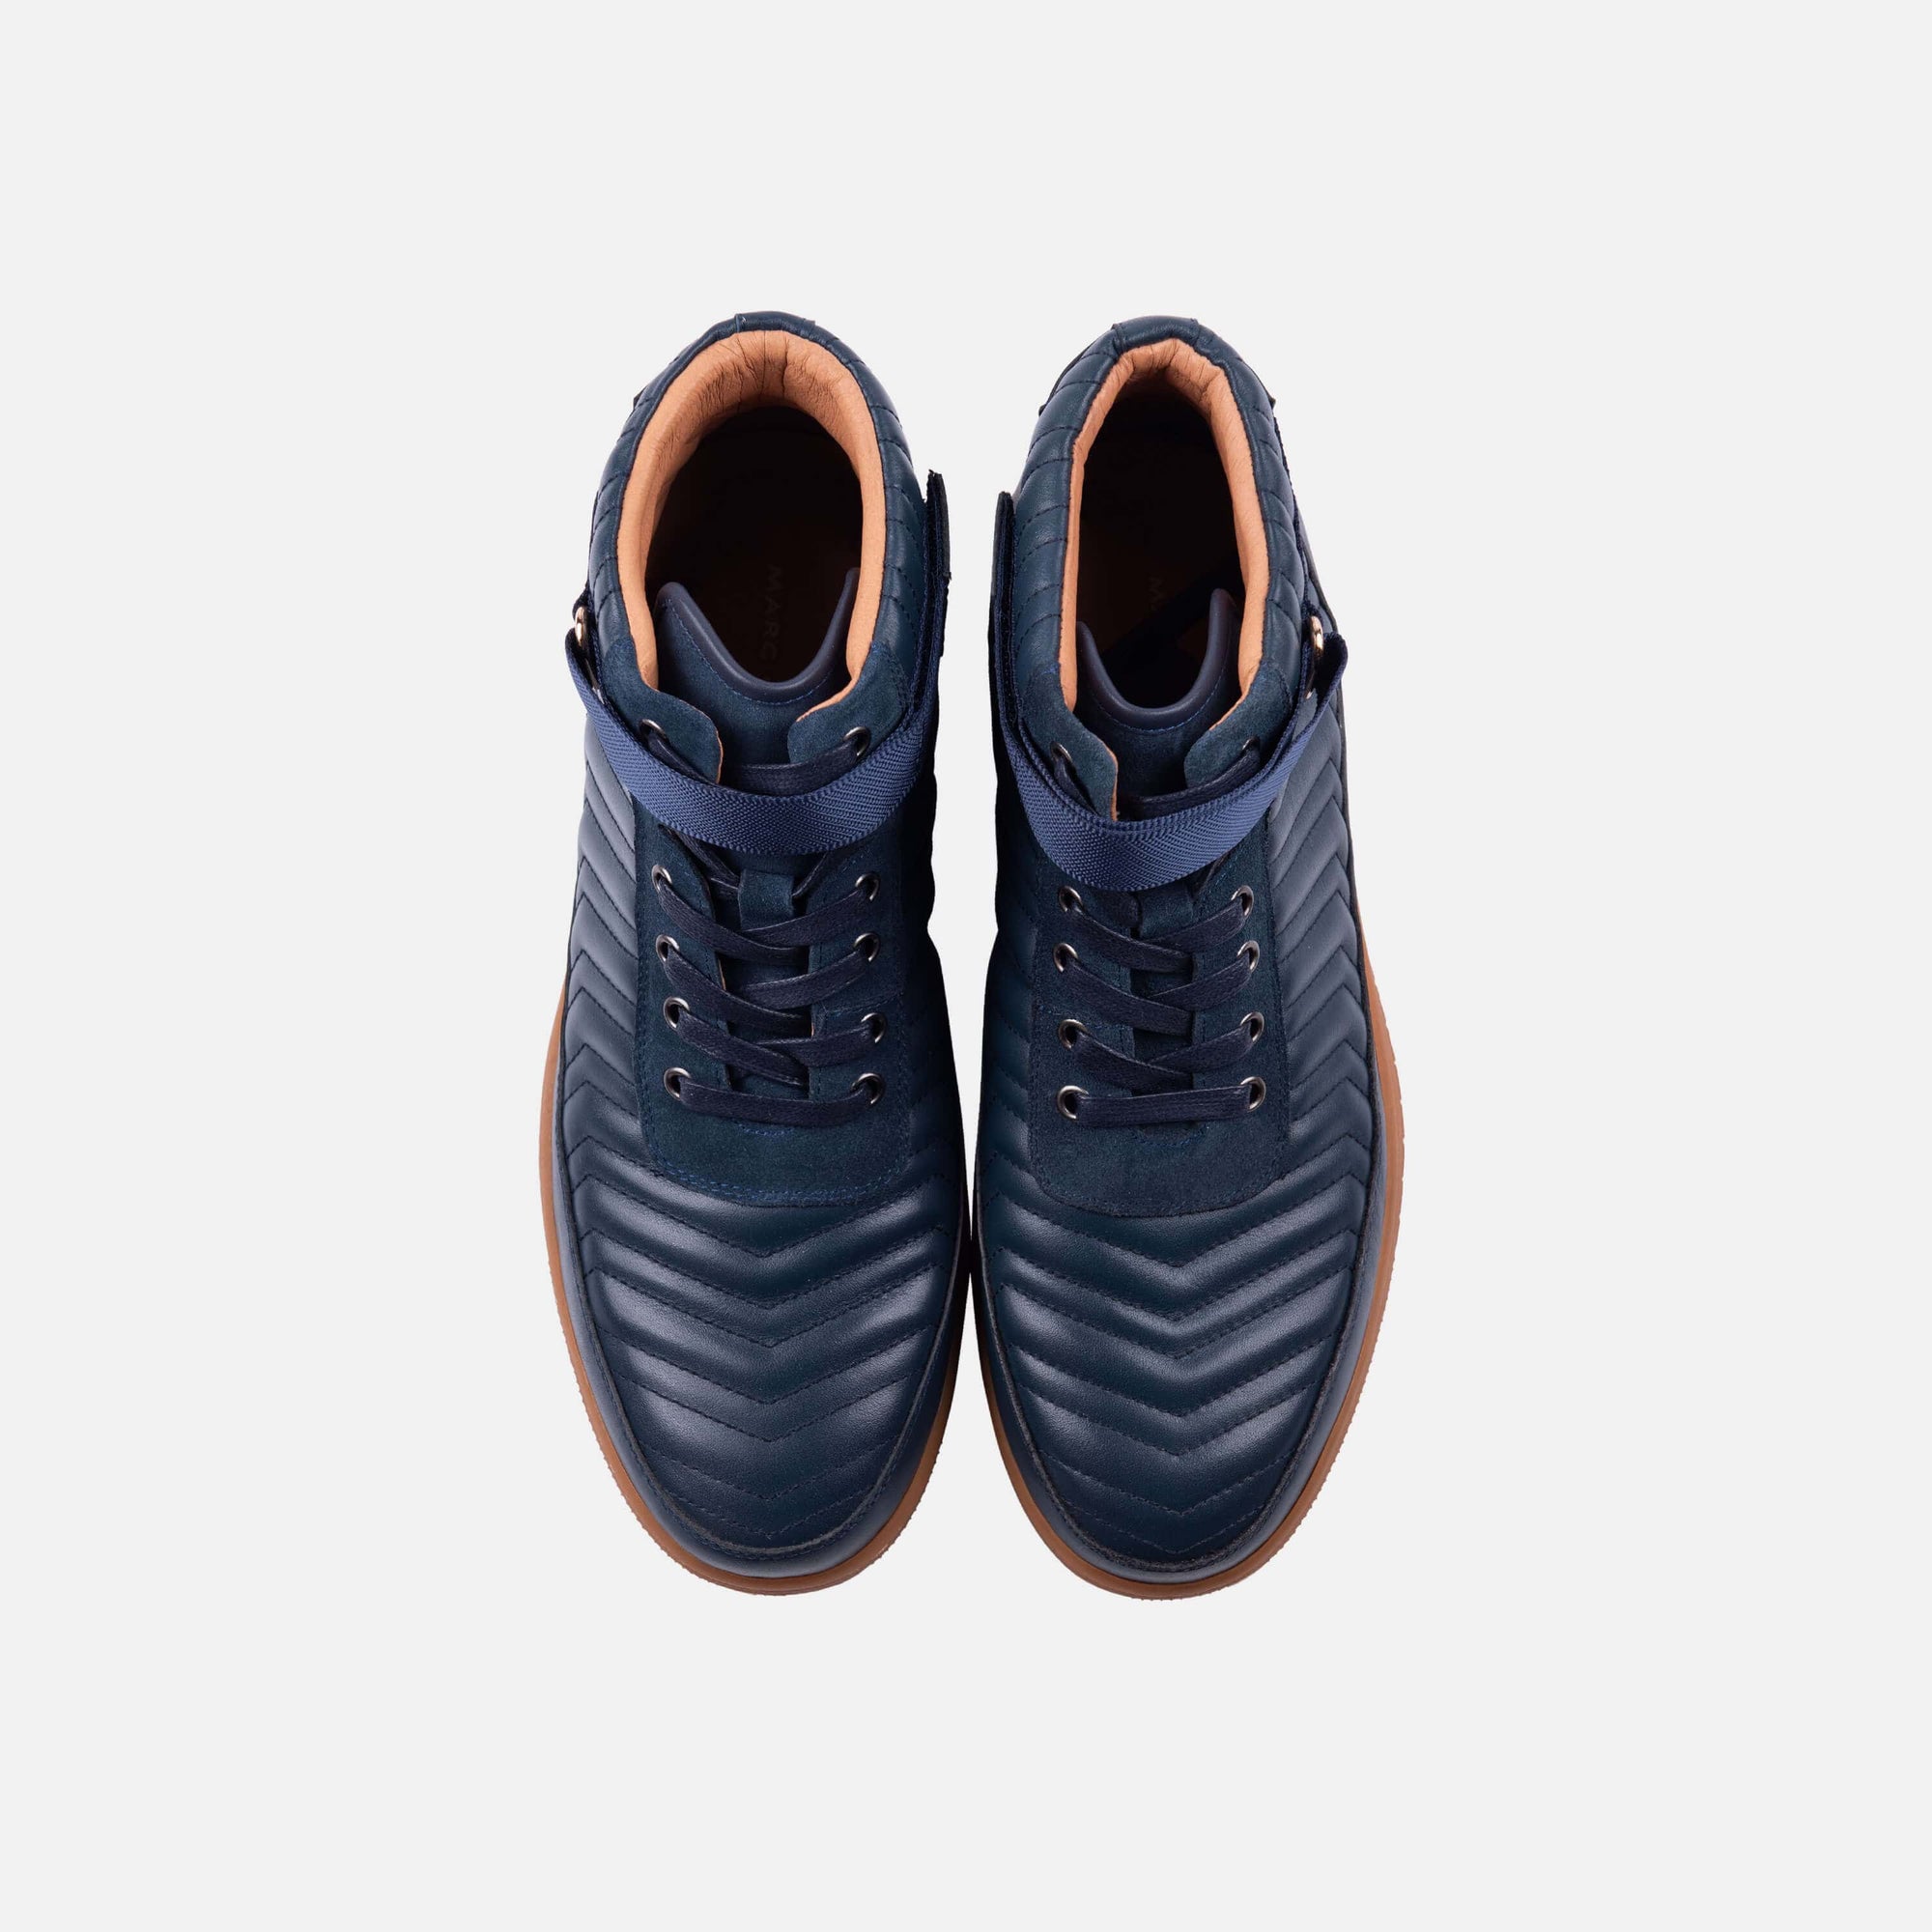 Yesler Midnight Blue Leather High Top Sneakers - Marc Nolan